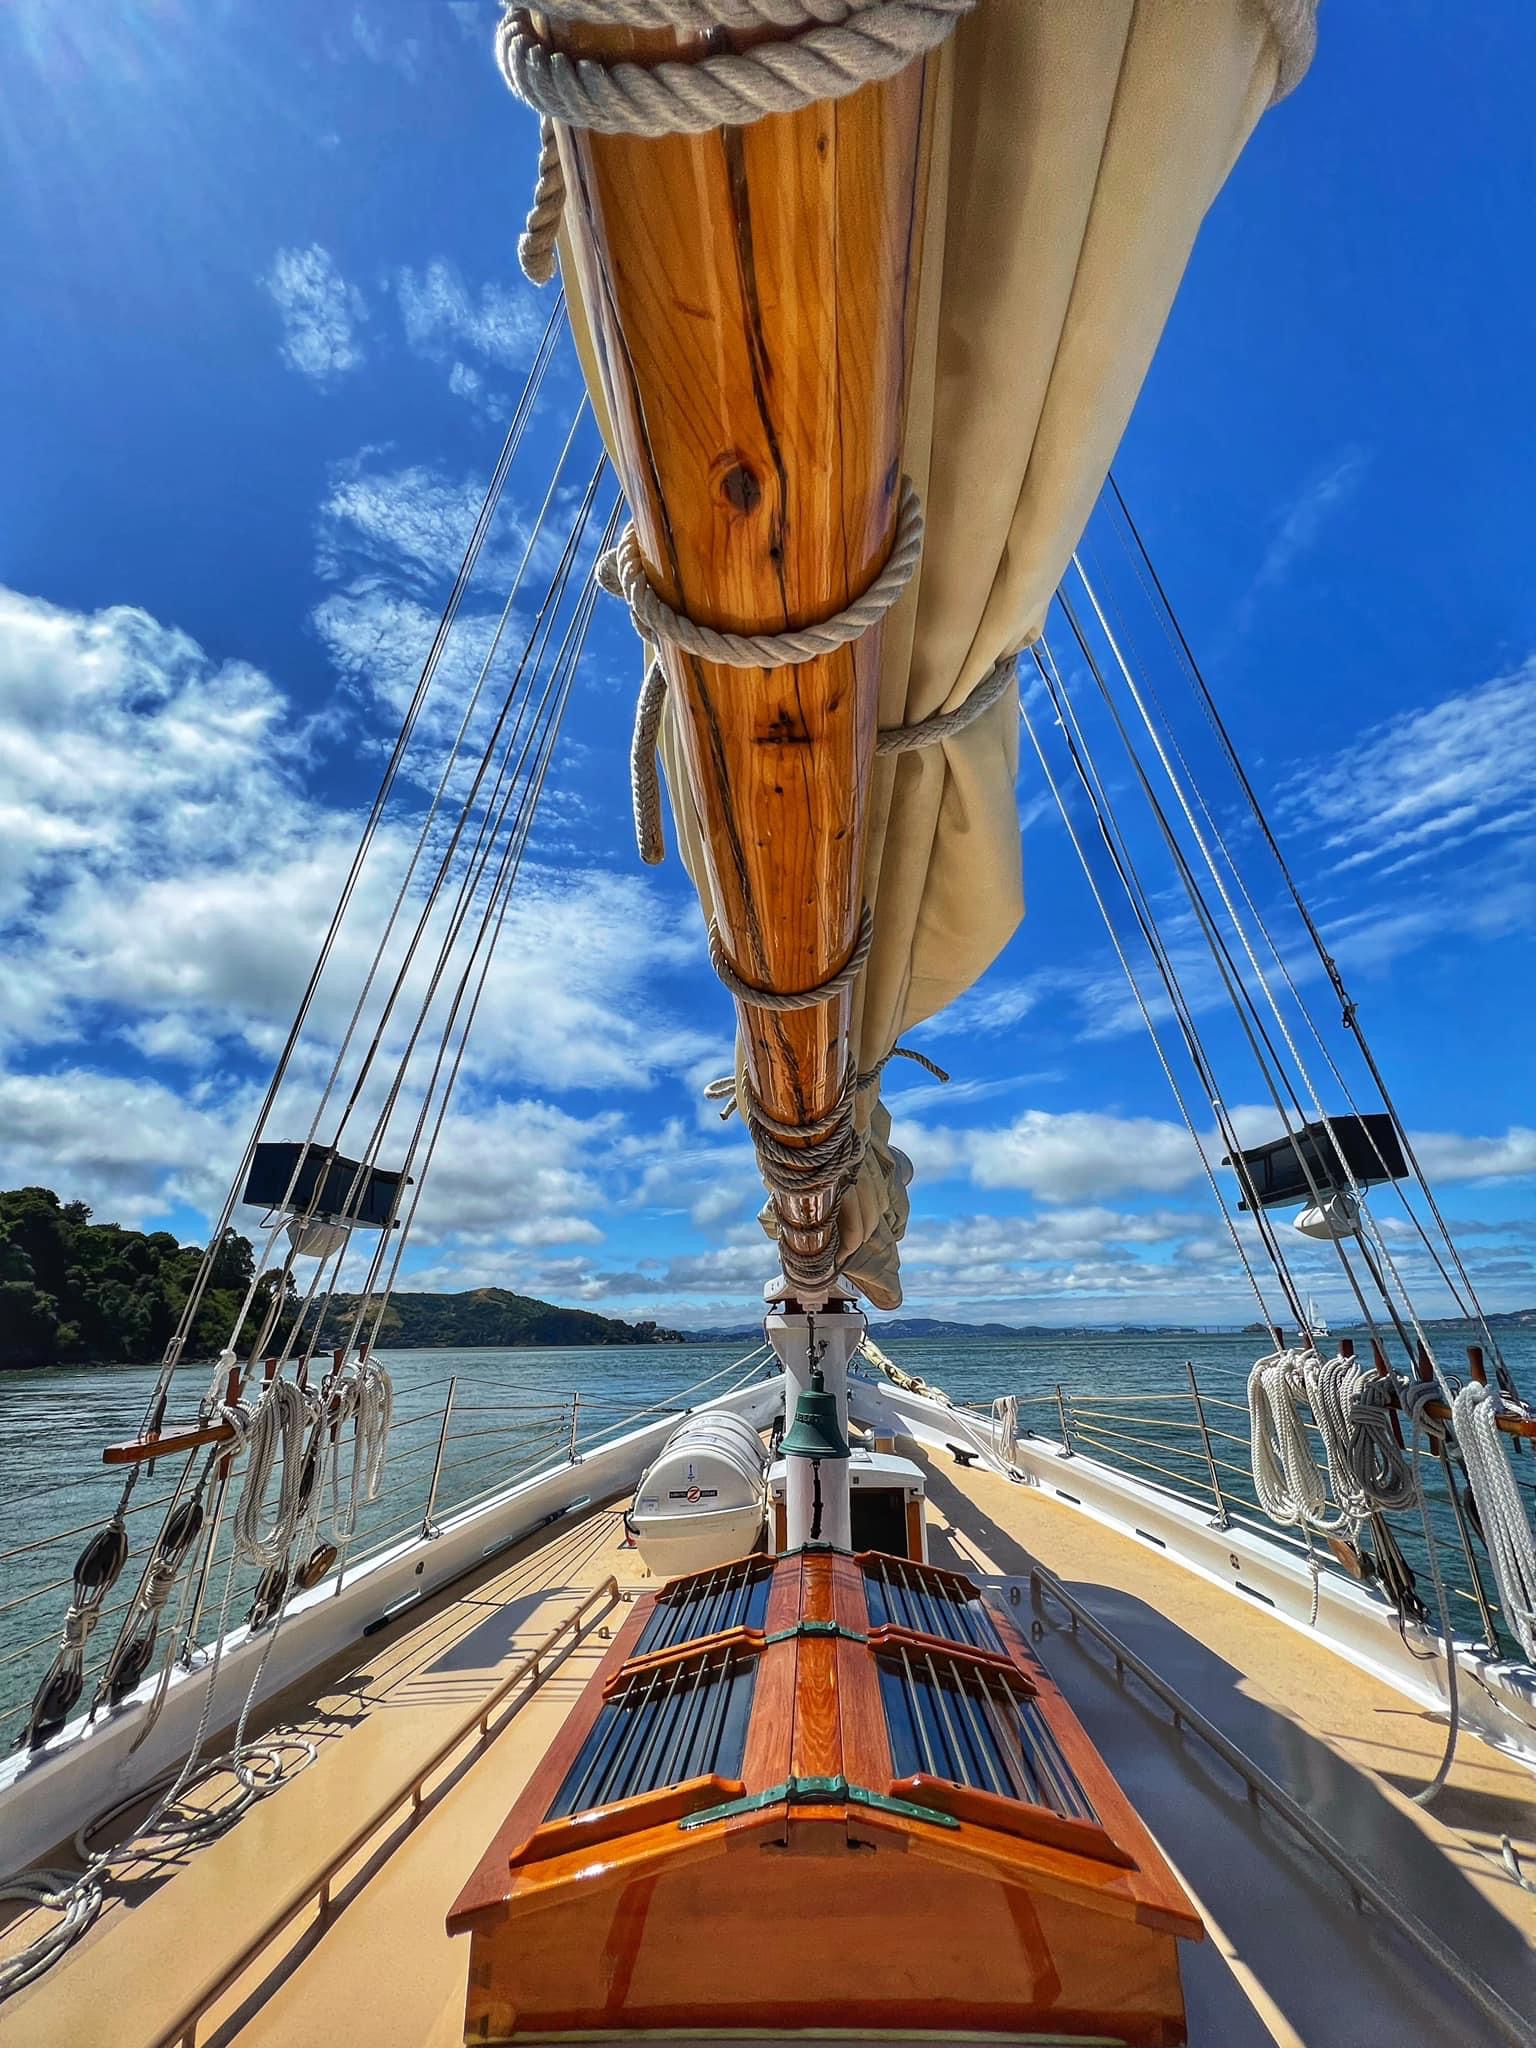 A sailboat's bow with a furled sail, polished wood, riggings, and a blue sky with clouds above.